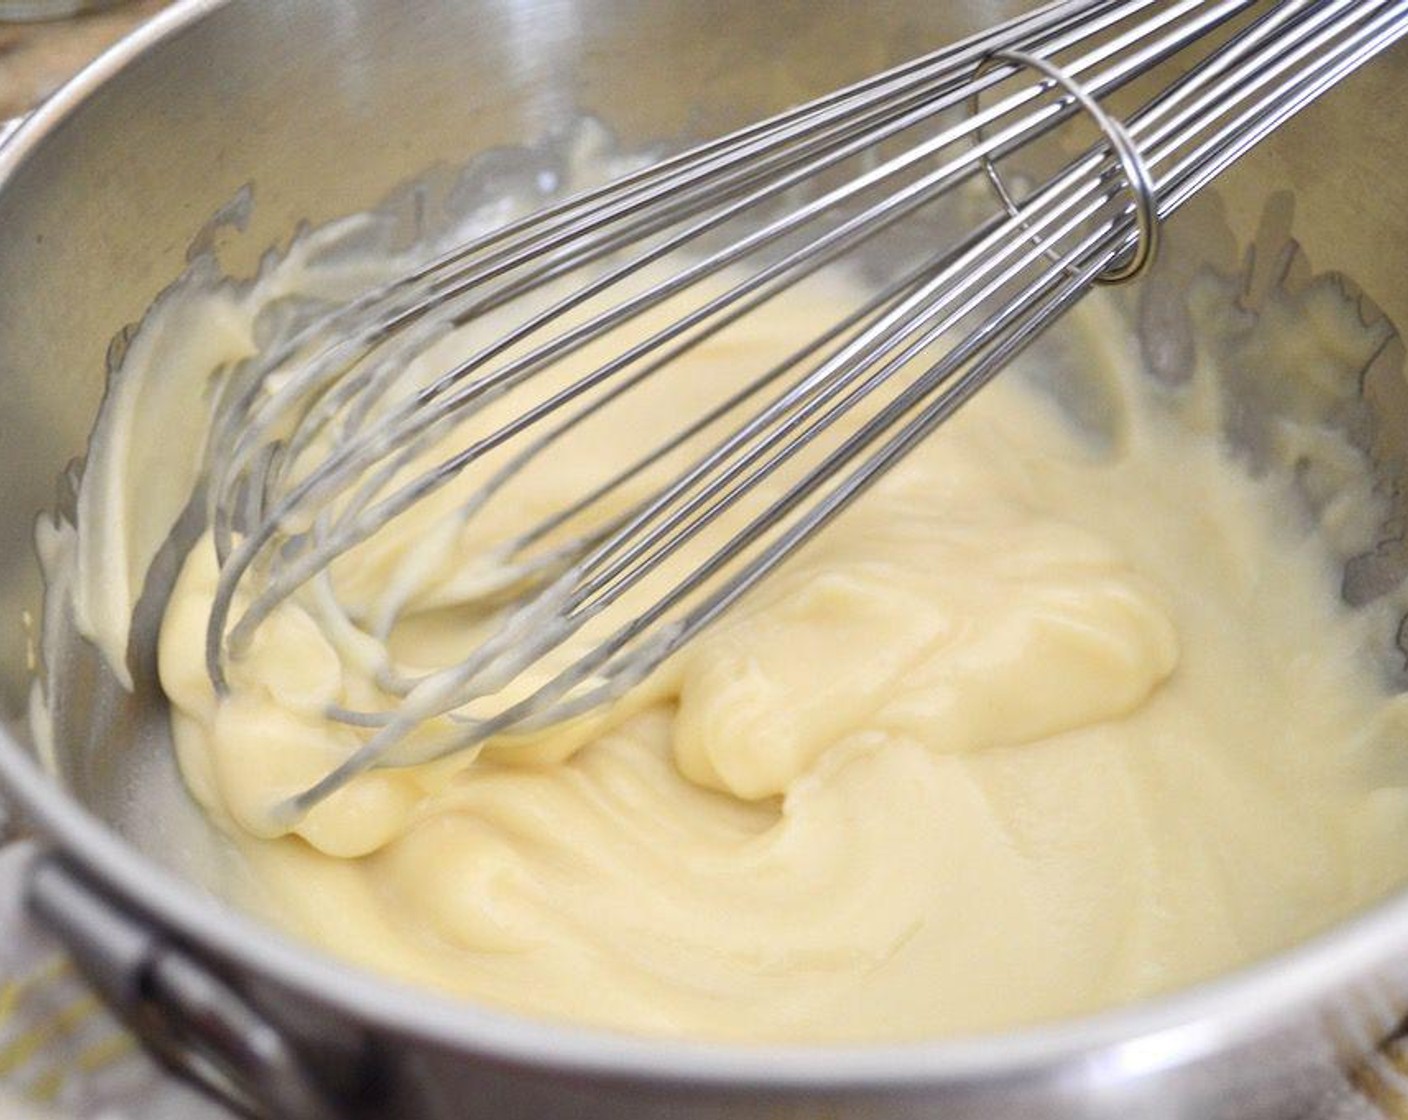 step 1 To make the mayo, whisk the Egg (1), Dijon Mustard (1 Tbsp), and Apple Cider Vinegar (1 Tbsp) together really well, then keep whisking while you slowly pour in the Canola Oil (1 cup). Keep whisking until you have a thick, gorgeous mayo.